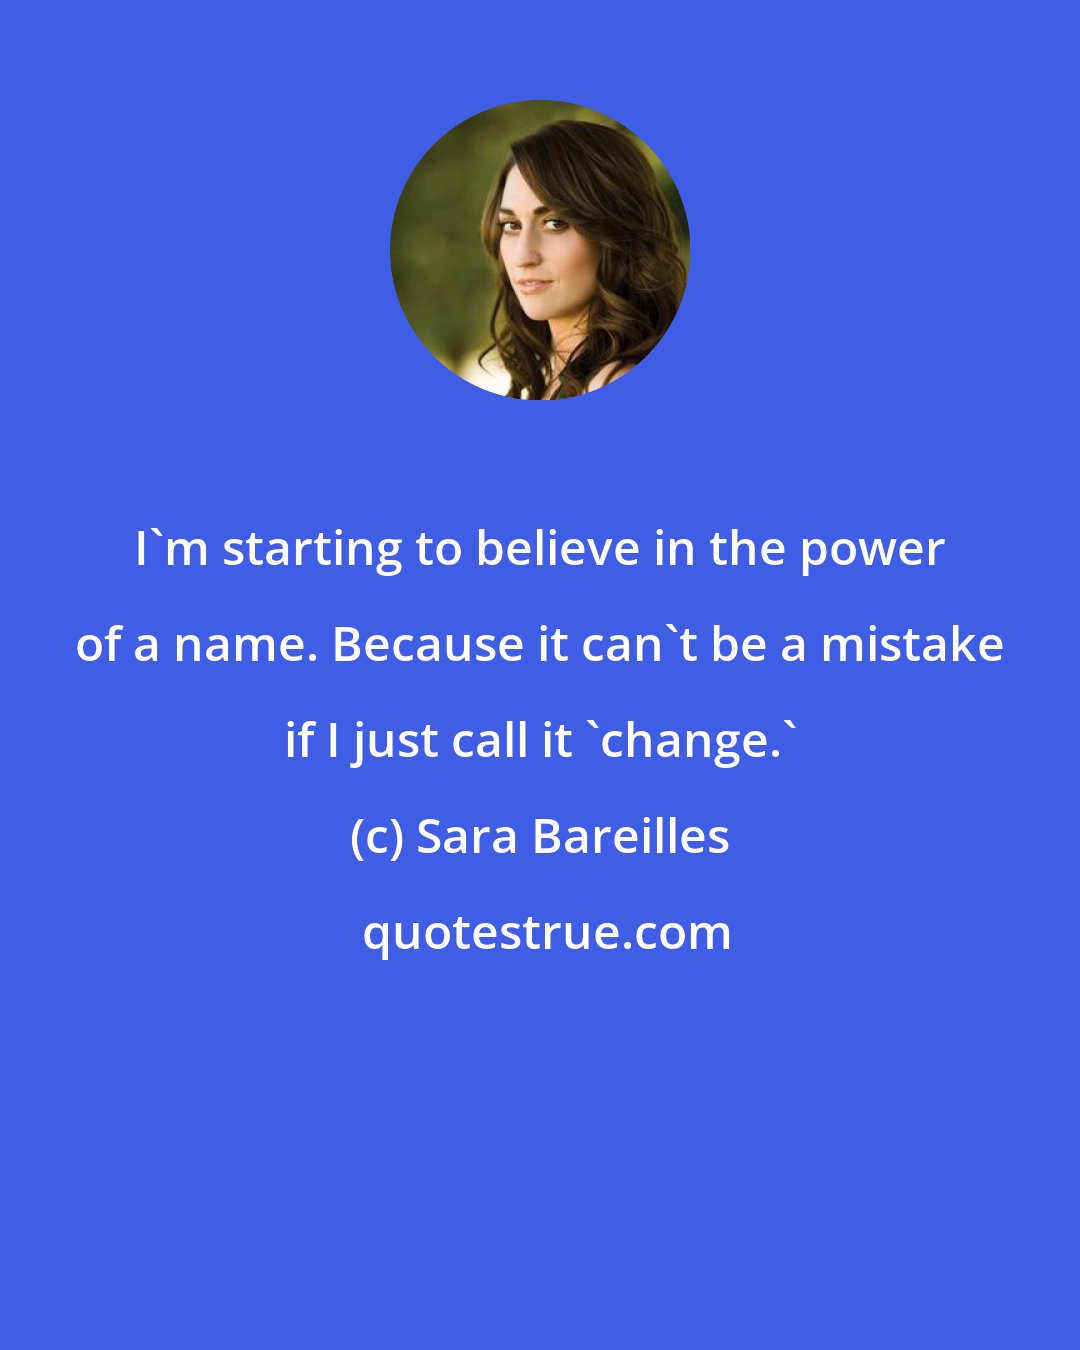 Sara Bareilles: I'm starting to believe in the power of a name. Because it can't be a mistake if I just call it 'change.'